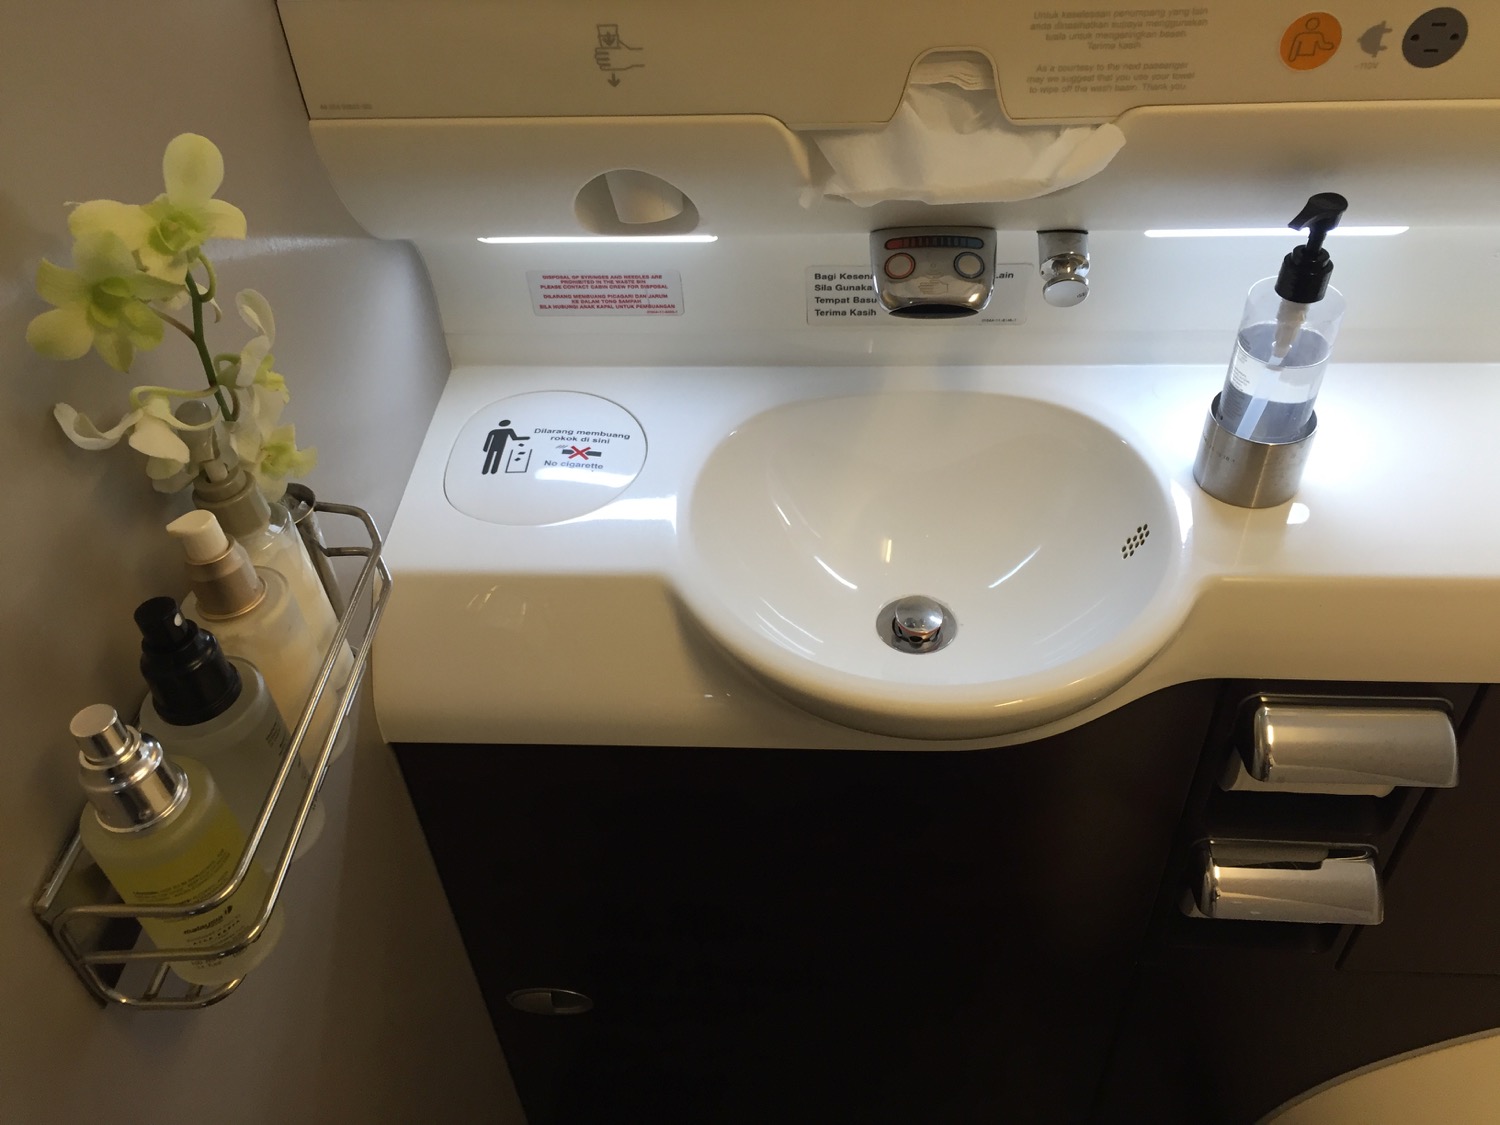 a sink with soap dispenser and a flower